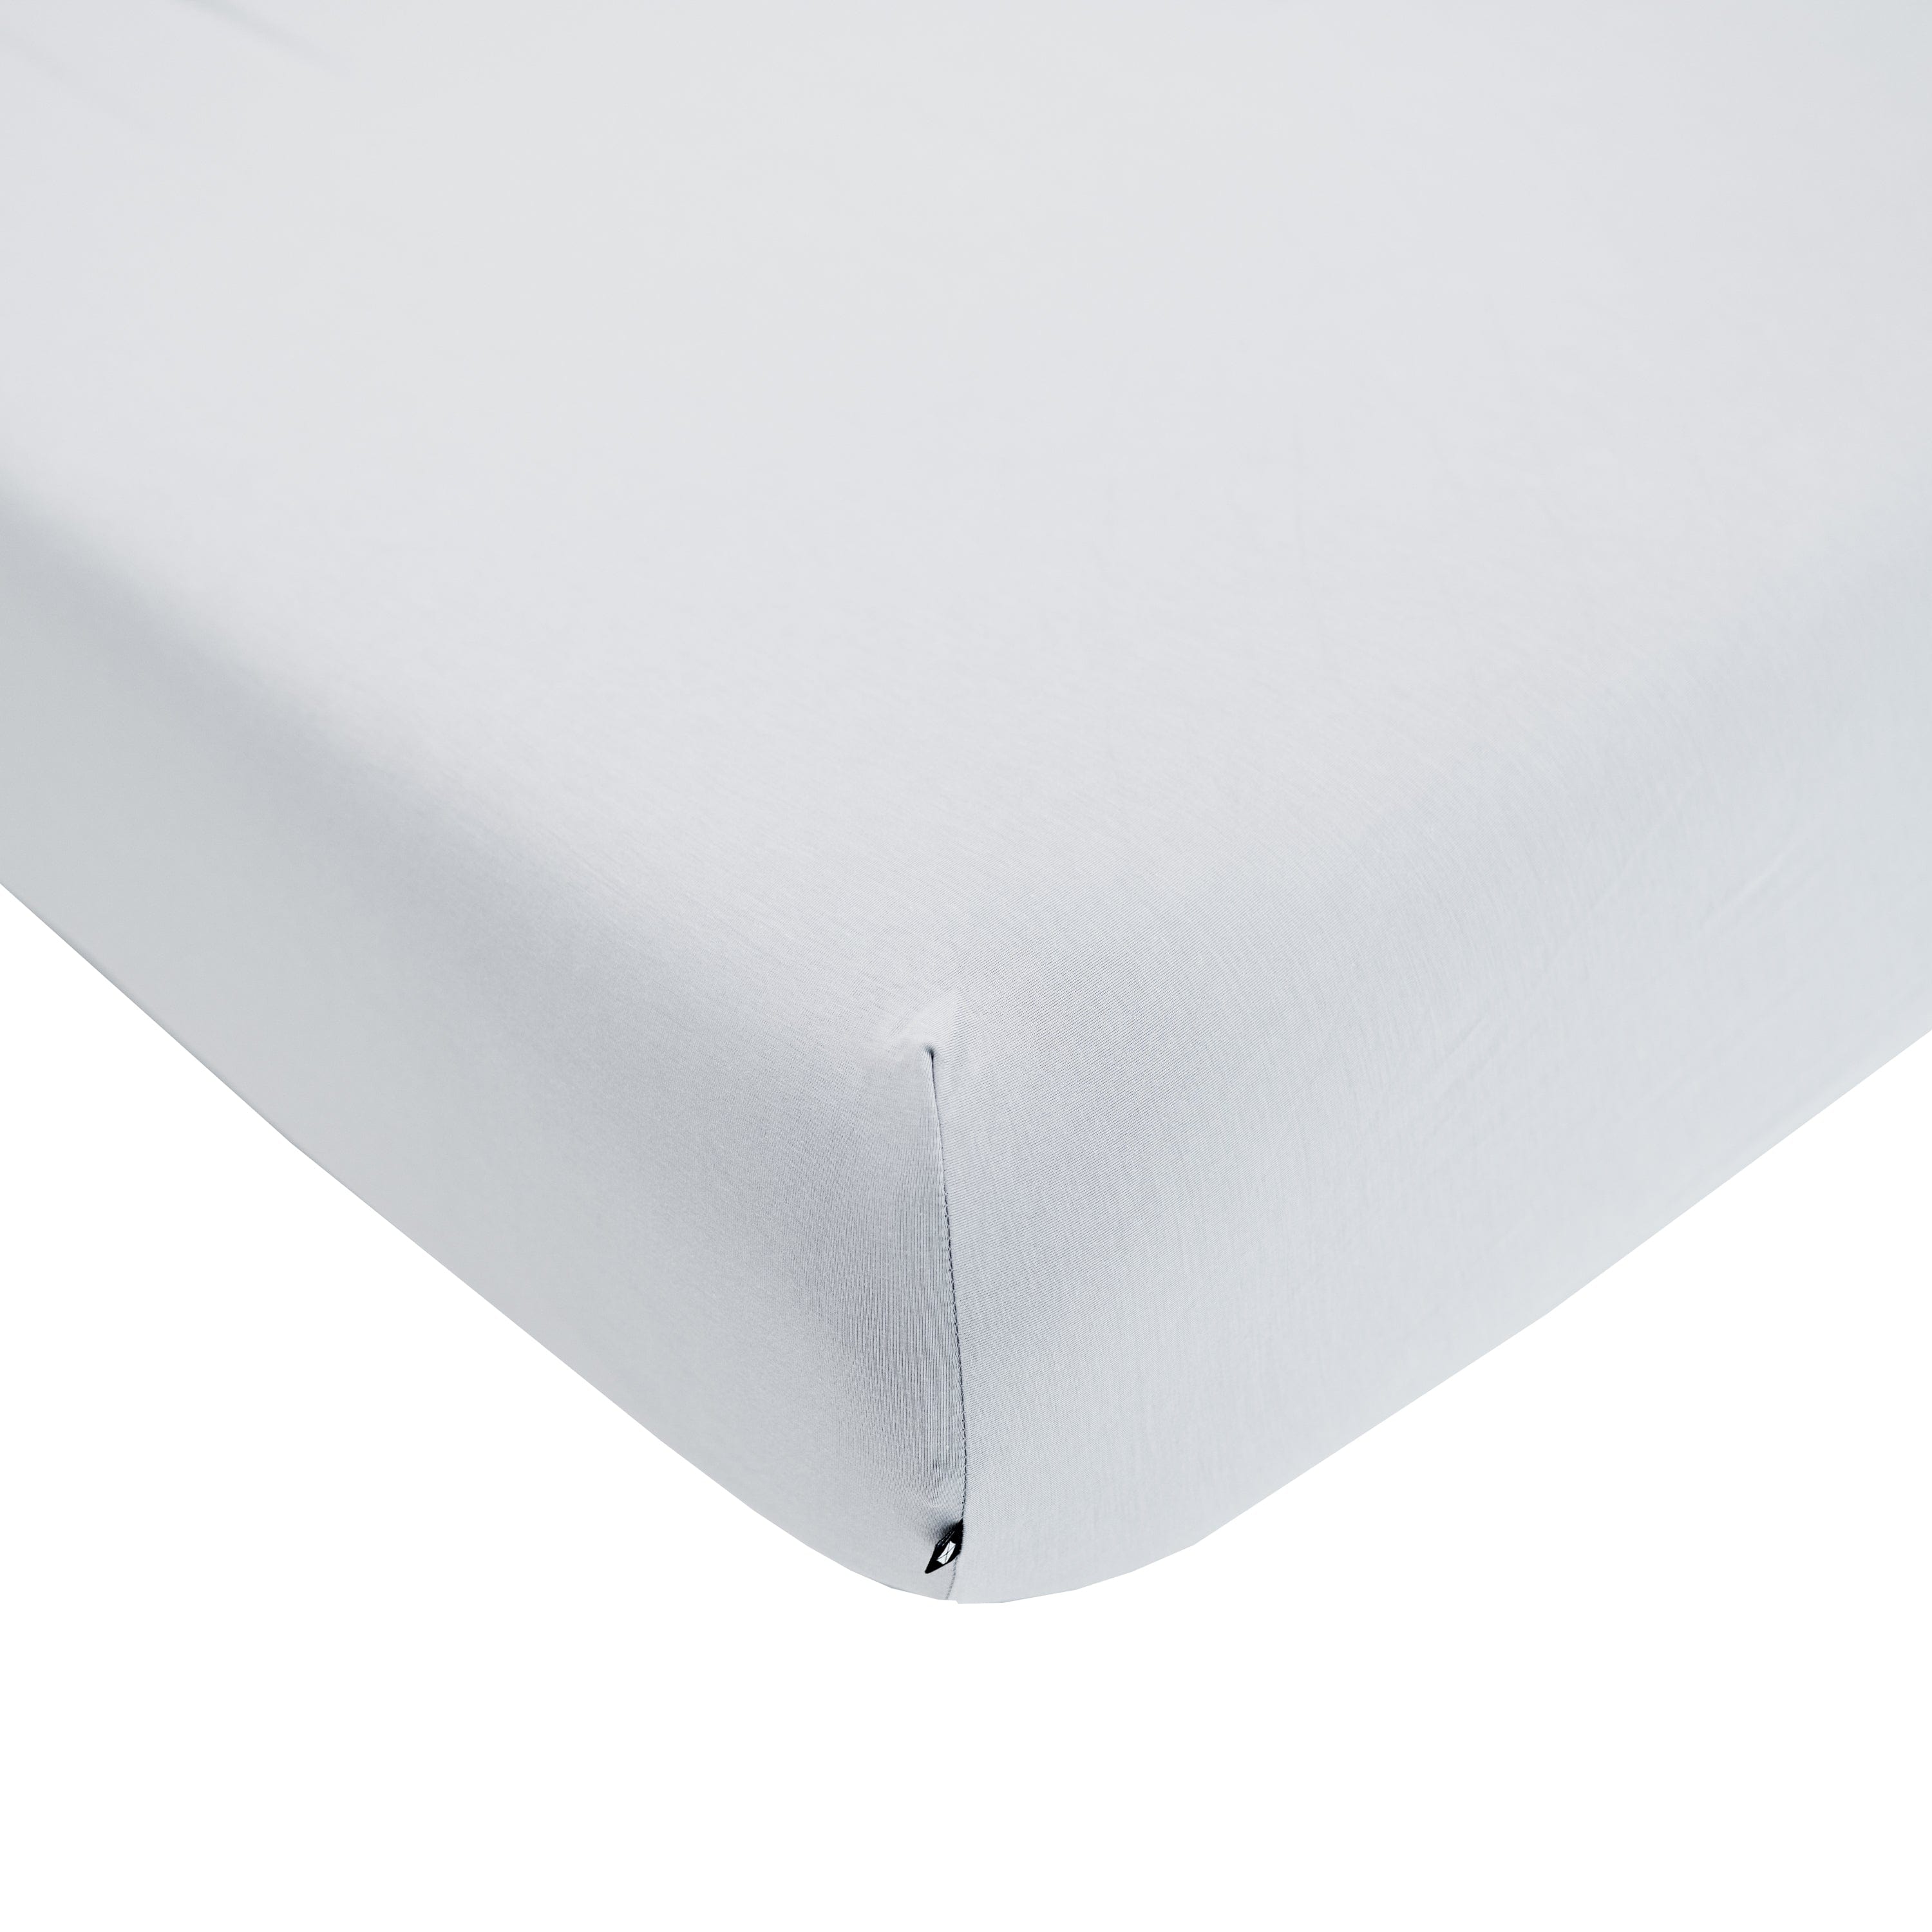 Kyte Baby King Sheet Storm / King Sheet King Fitted Sheet with Pillowcases in Storm